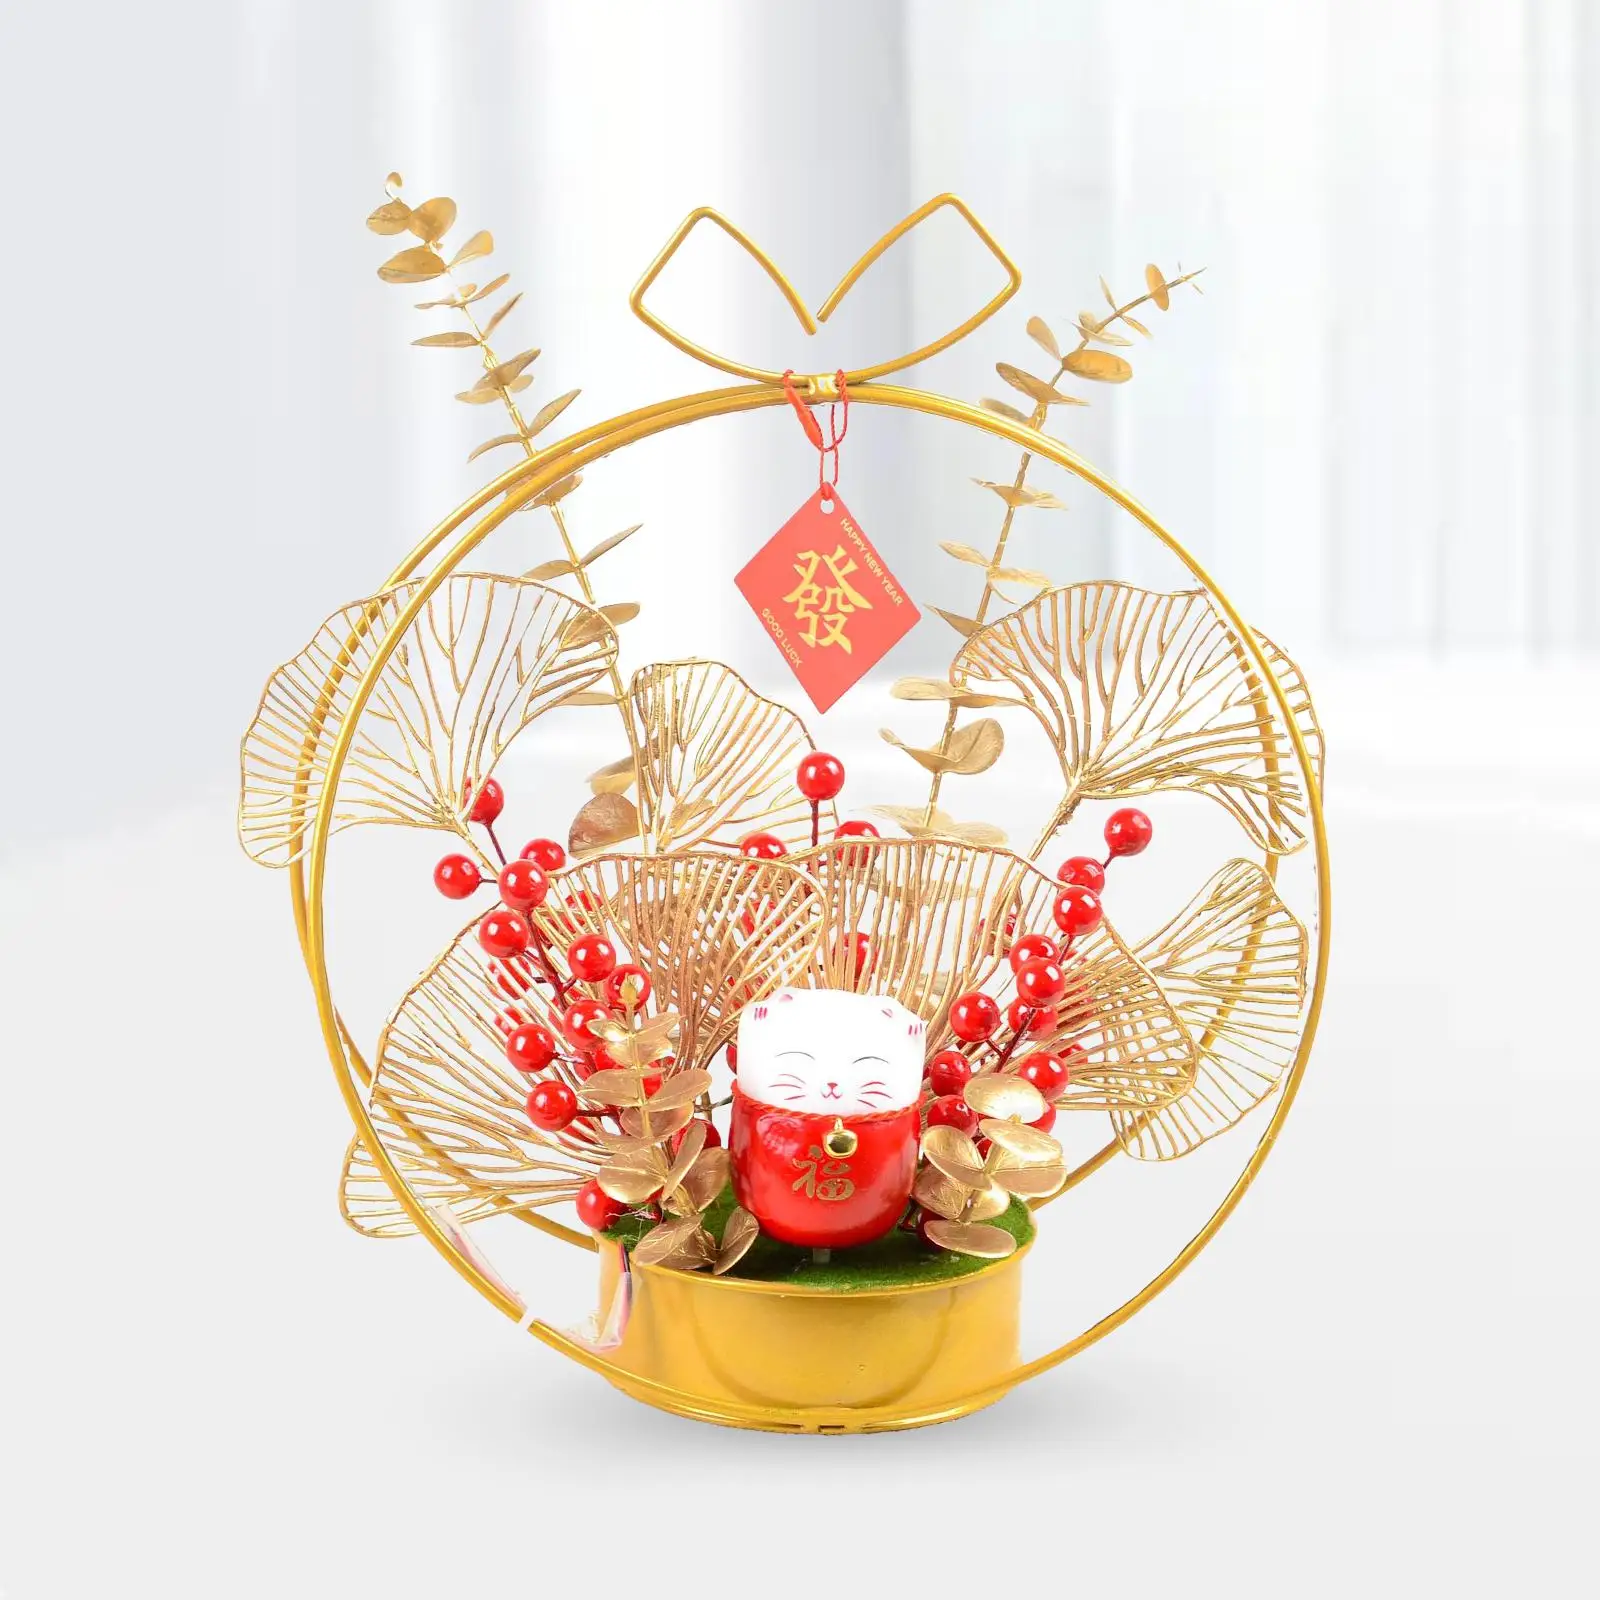 Lighted Artificial Potted Flower Decor Chinese New Year Ornaments for Hotel